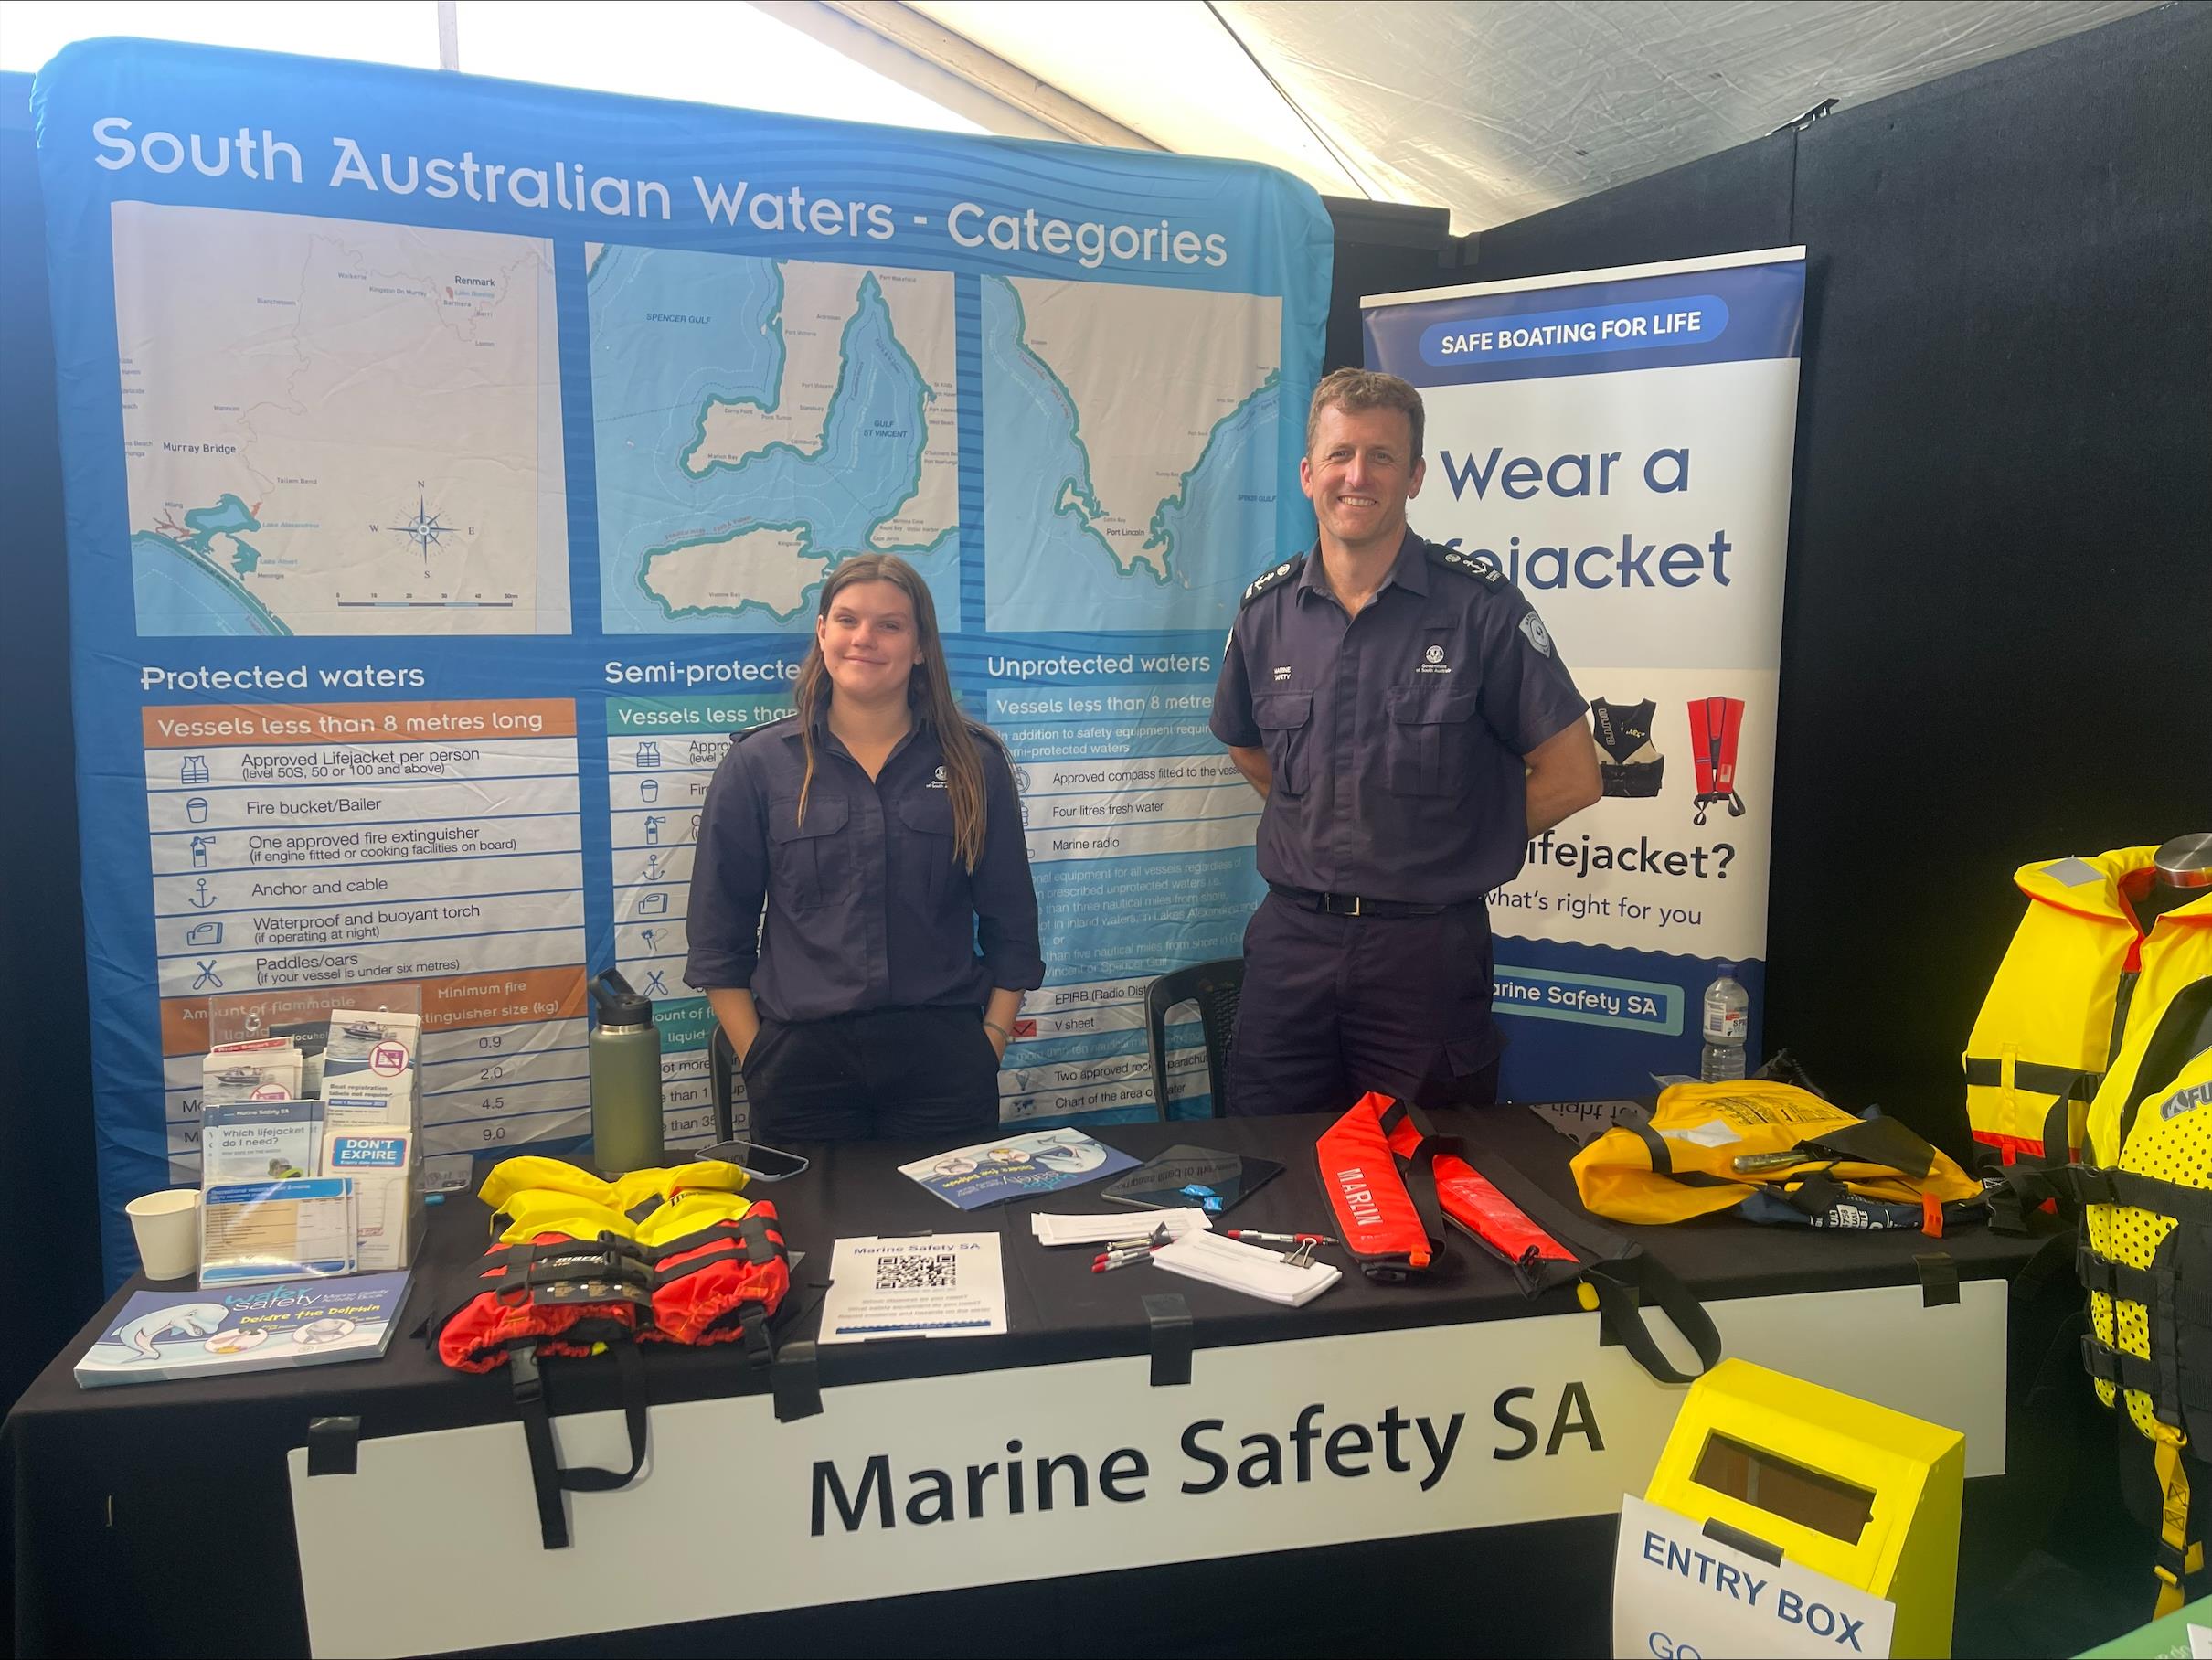 Marine Safety and Compliance staff standing in front of the Marine Safety SA display